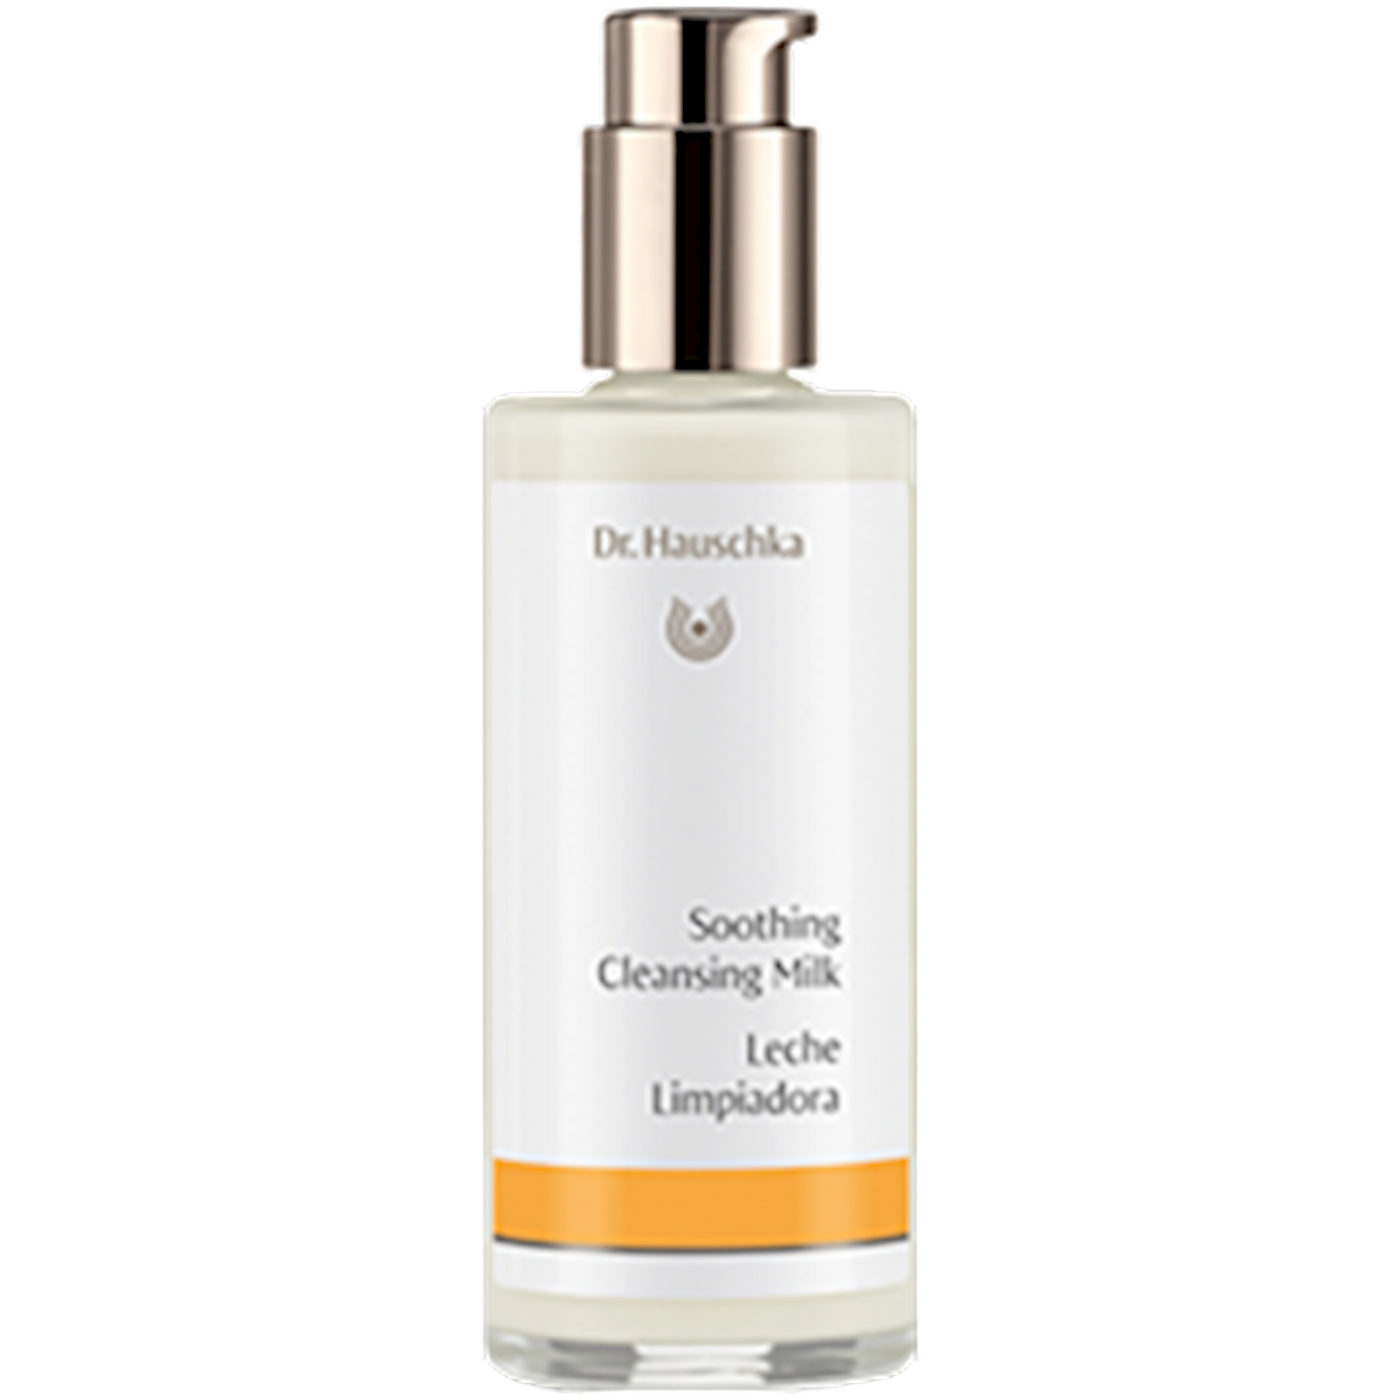 Soothing Cleansing Milk 4.9 fl oz Curated Wellness